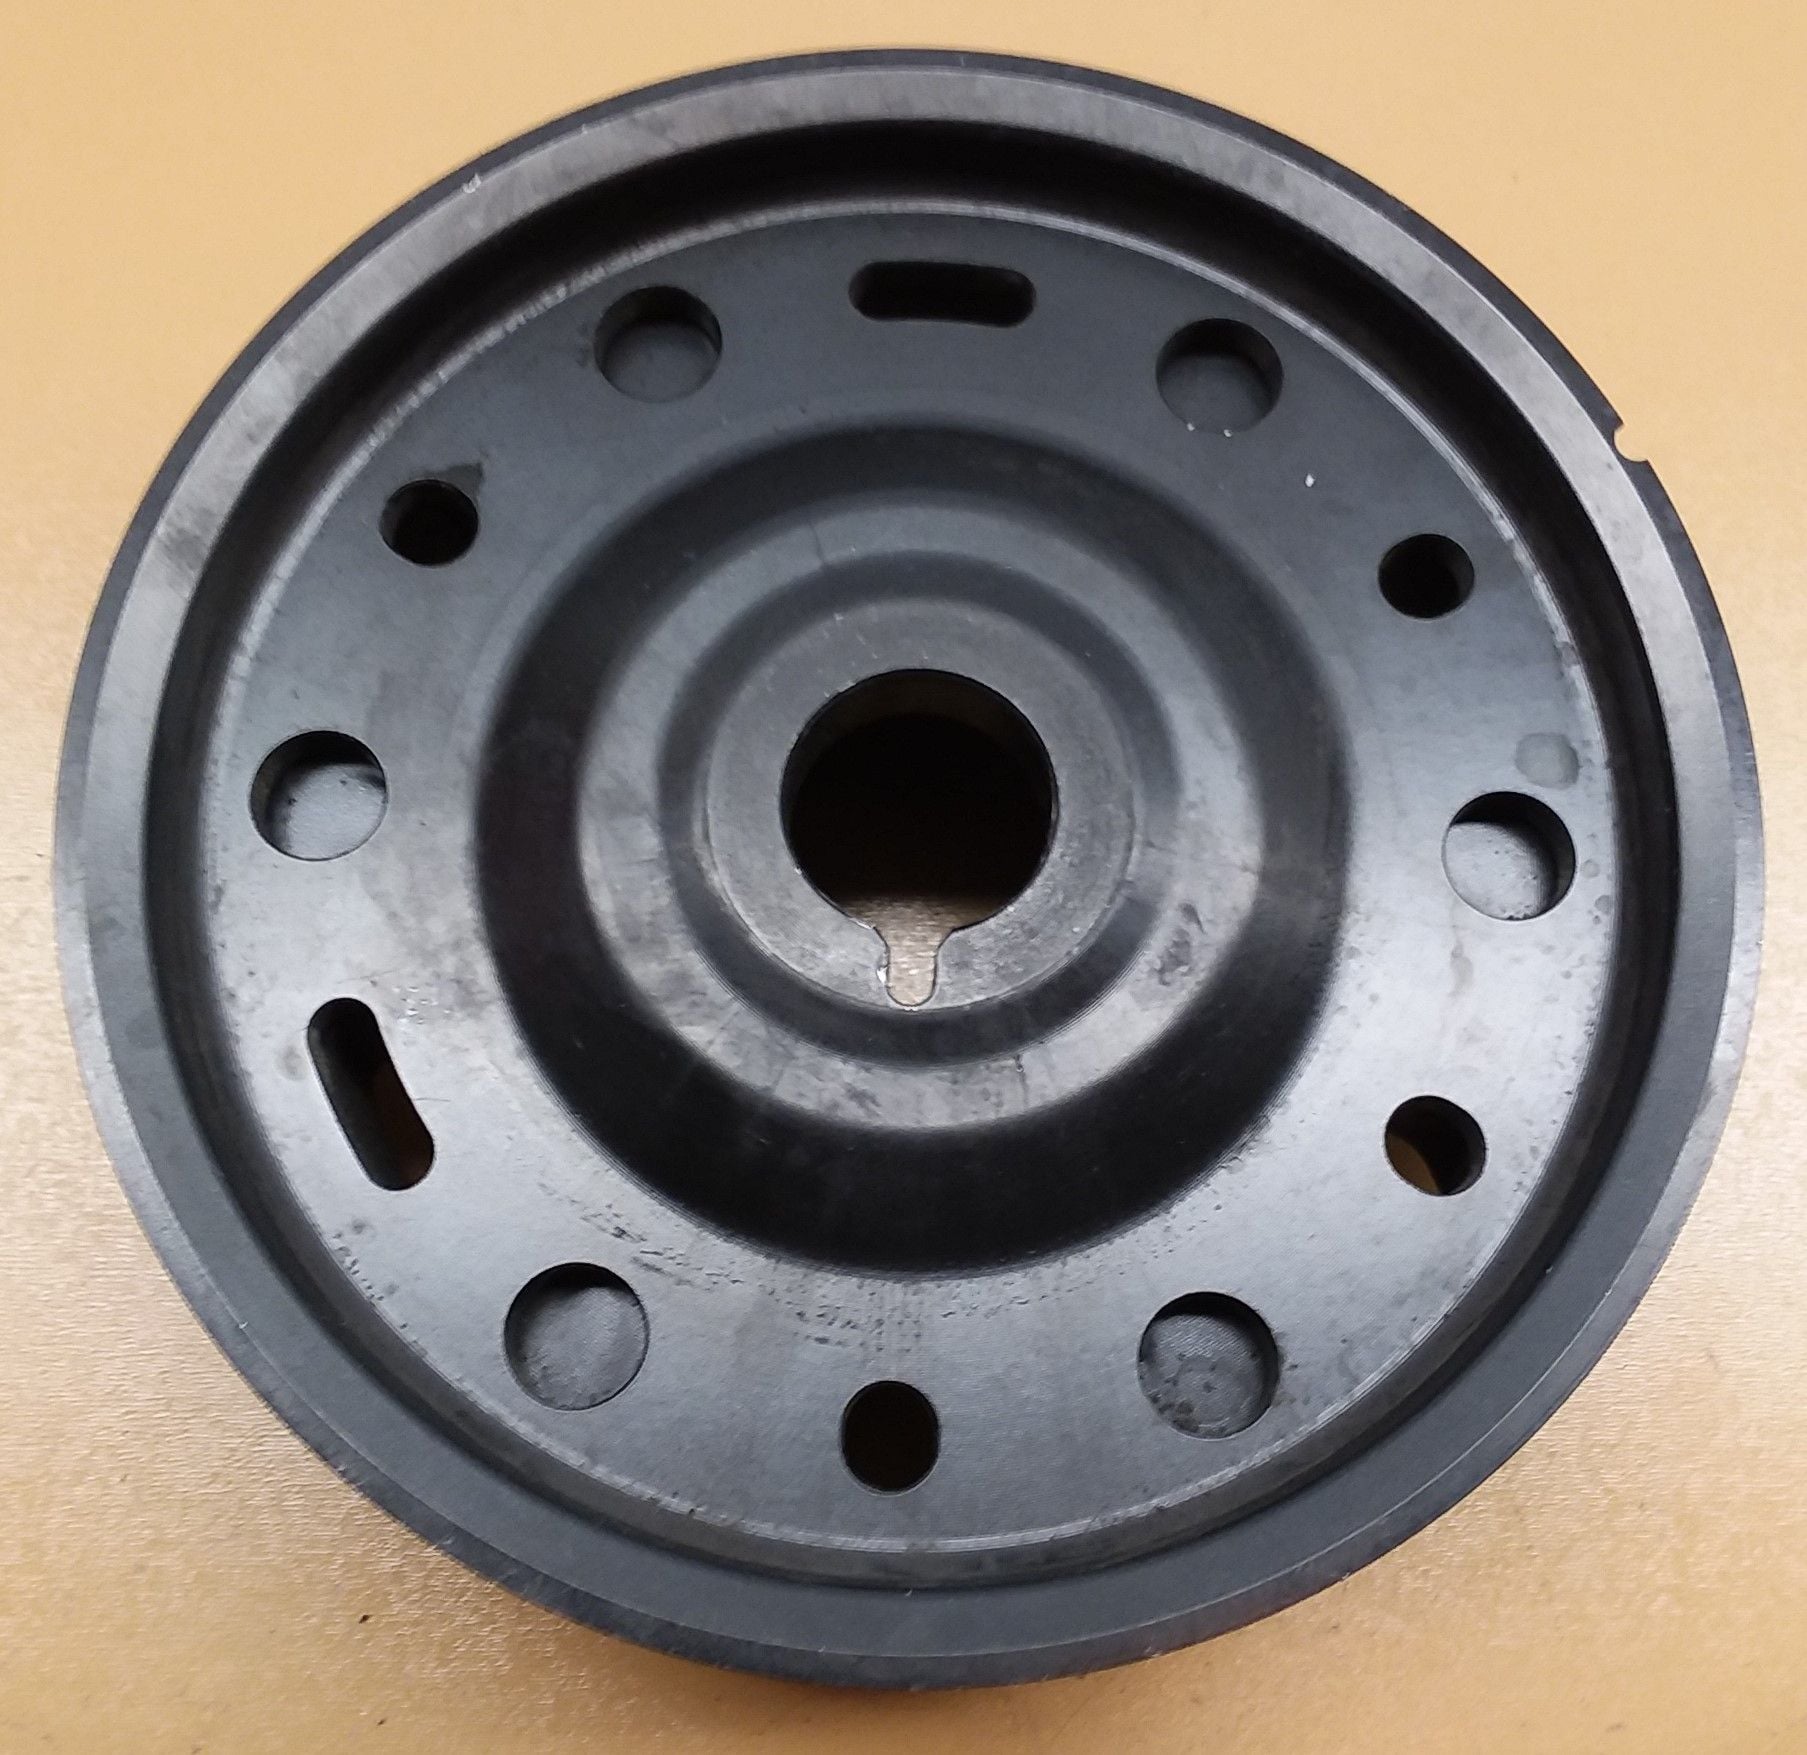 Miscellaneous - Engine Vibration Damper Pulley 99710224101 - Used - Colorado Springs, CO 80906, United States